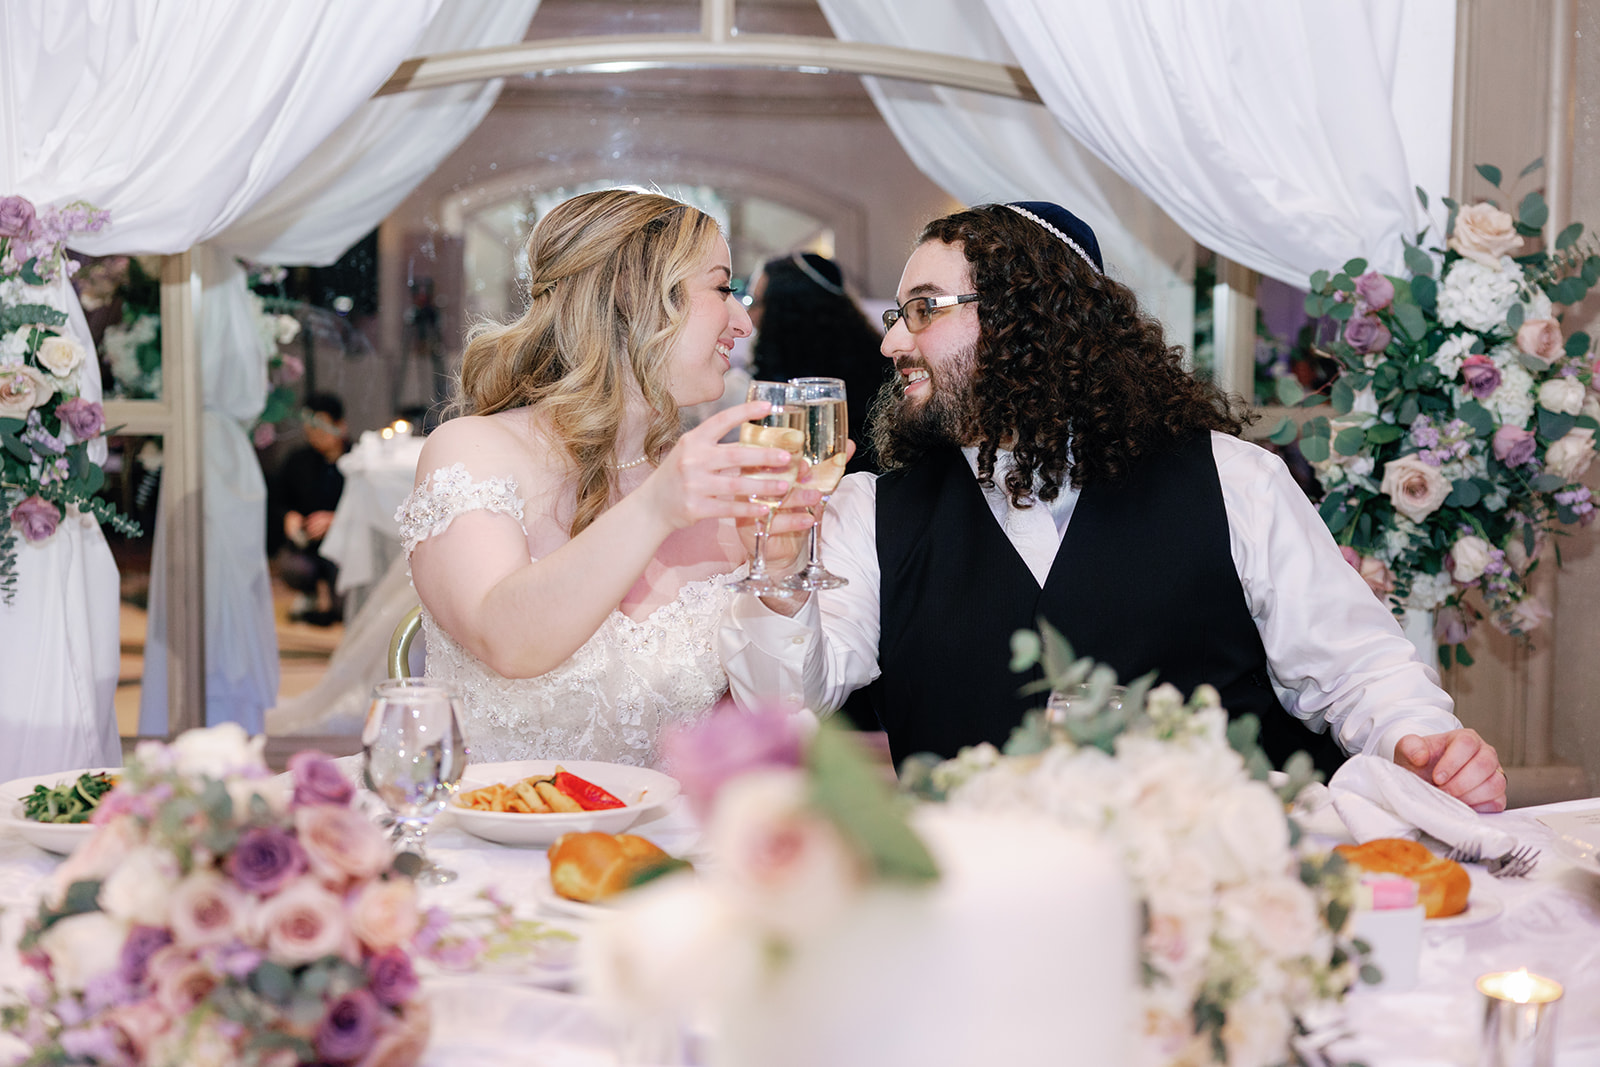 Newlyweds share a toast of champagne while sitting at their head table in front of a mirror